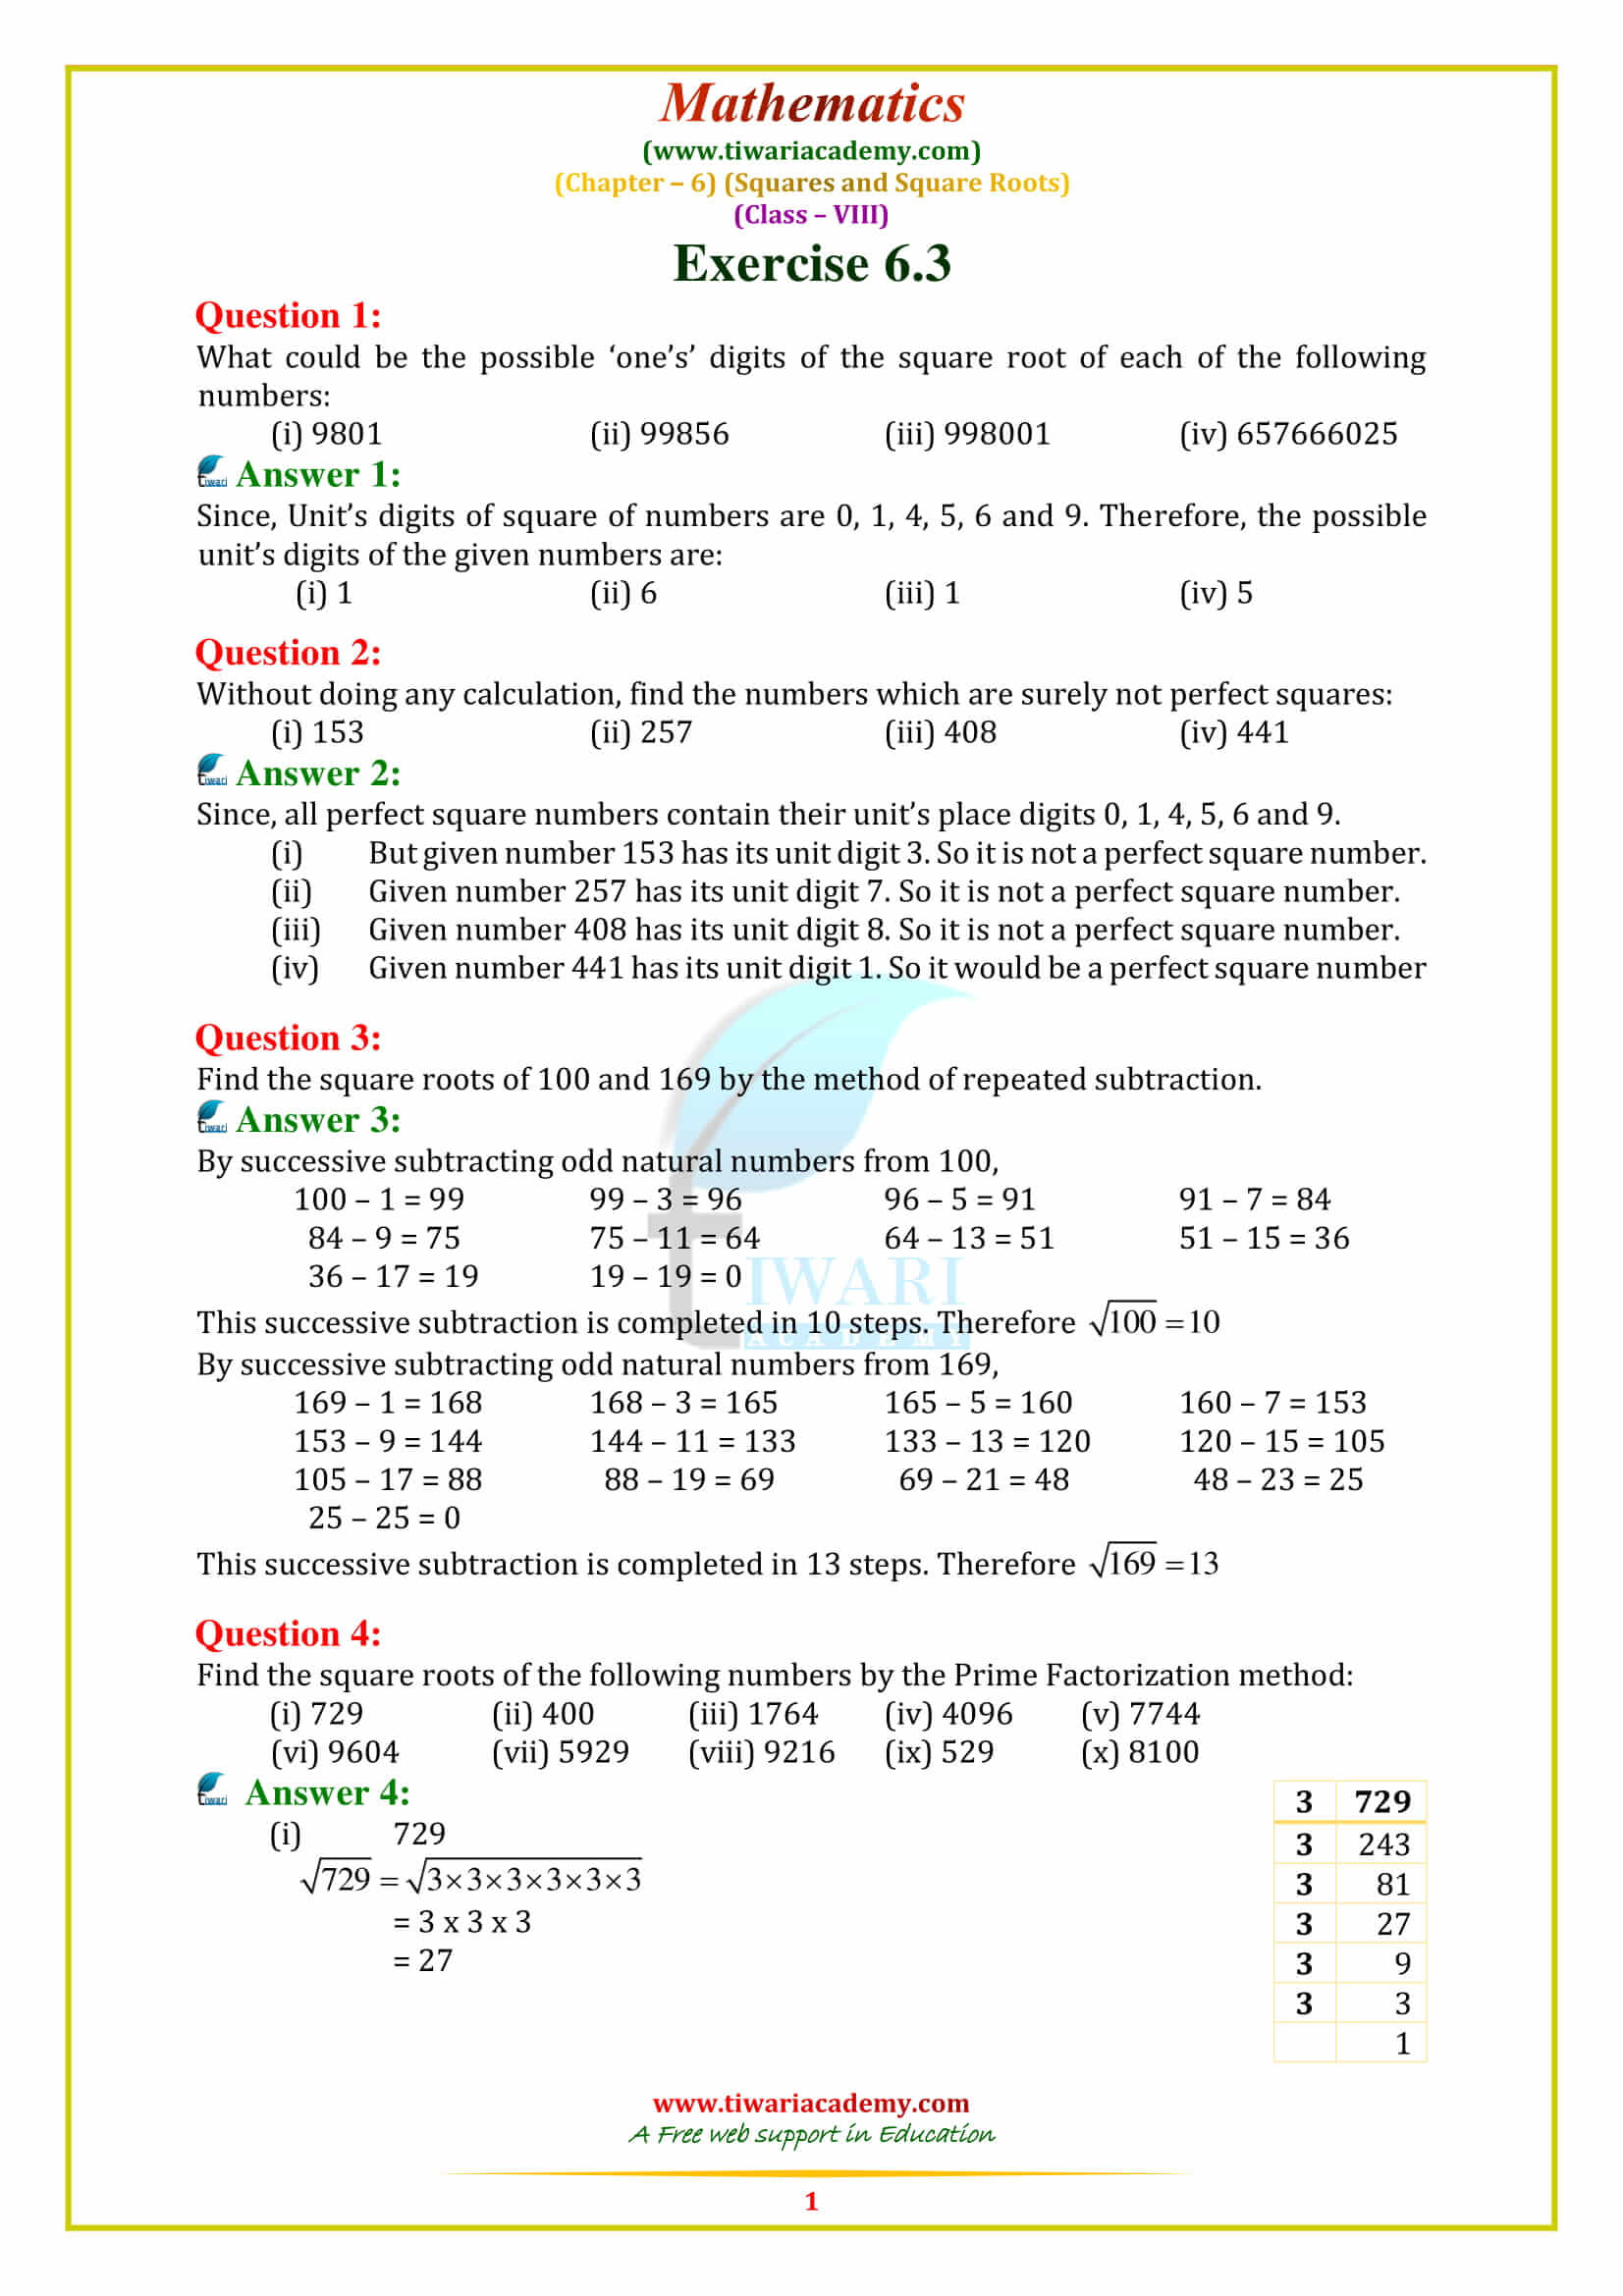 NCERT Solutions for Class 8 Maths Chapter 6 Exercise 6.3